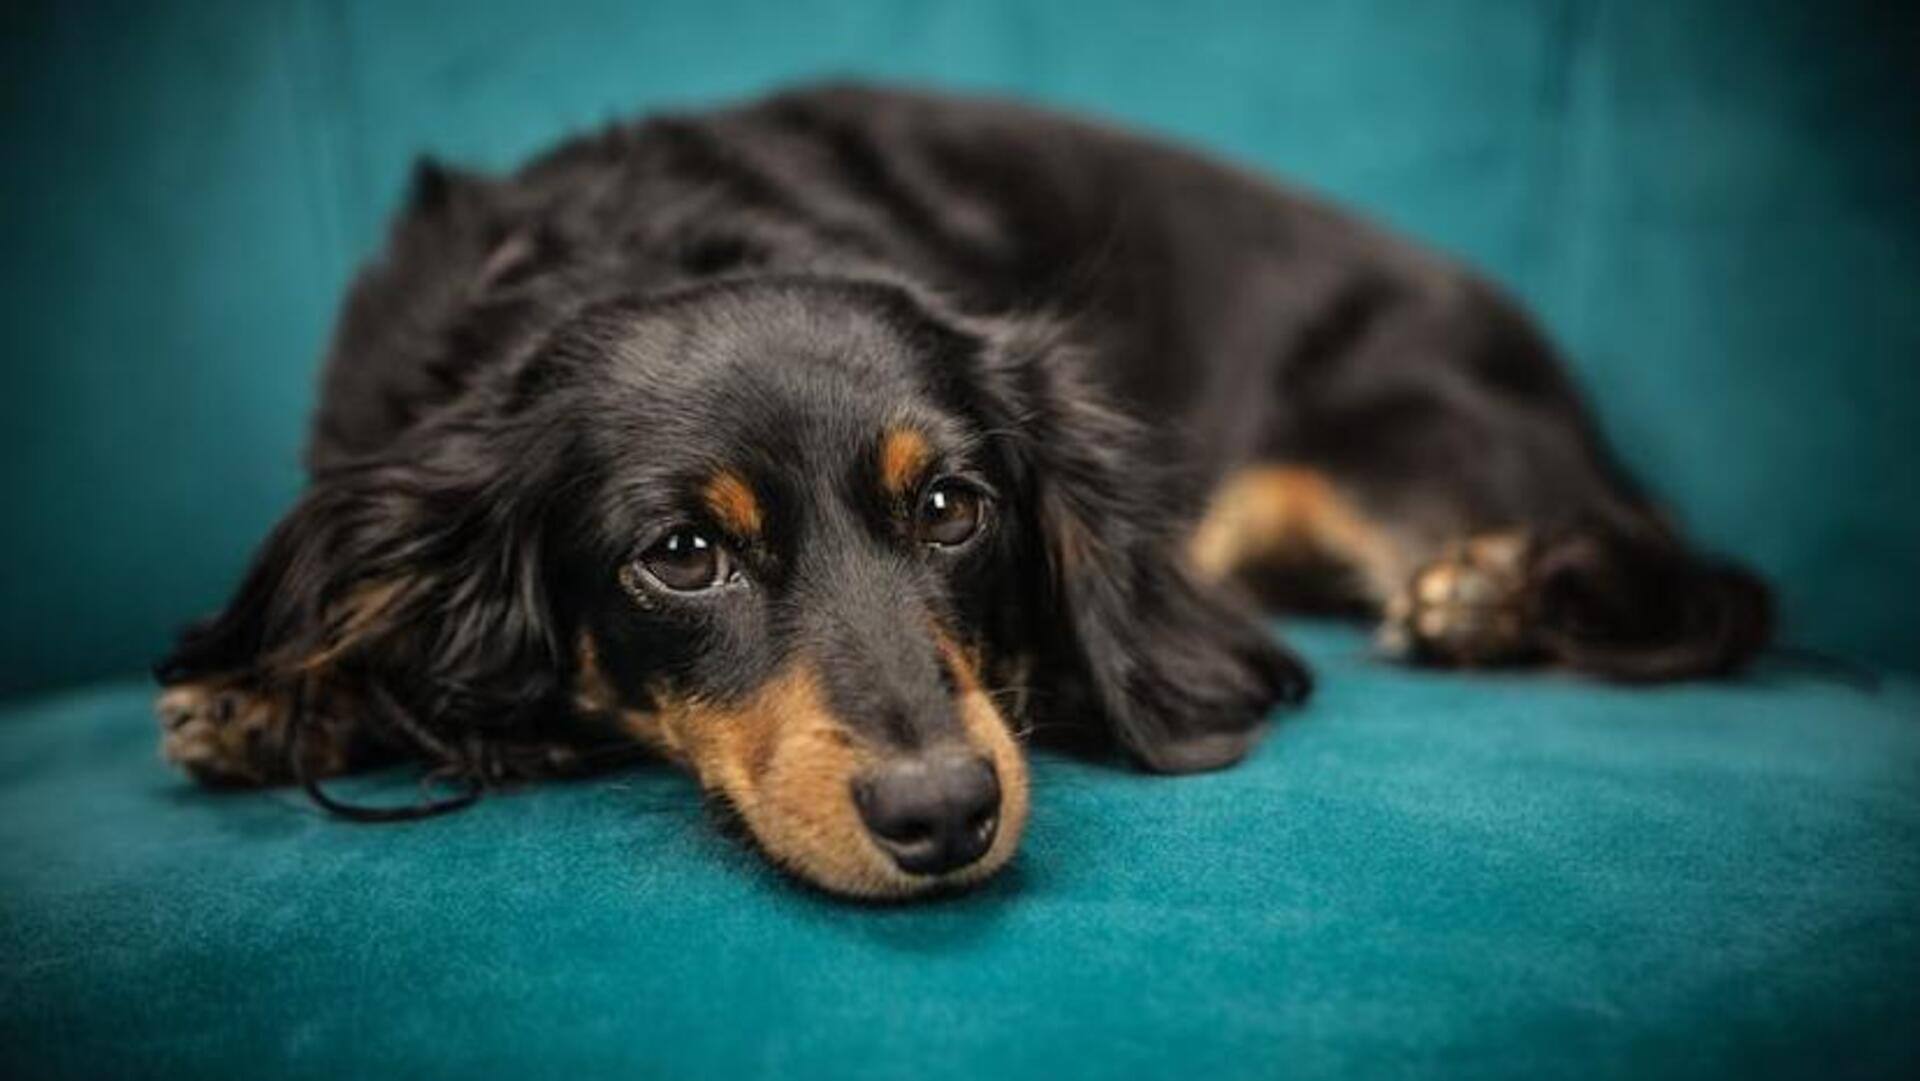 Care tips for your old Dachshund